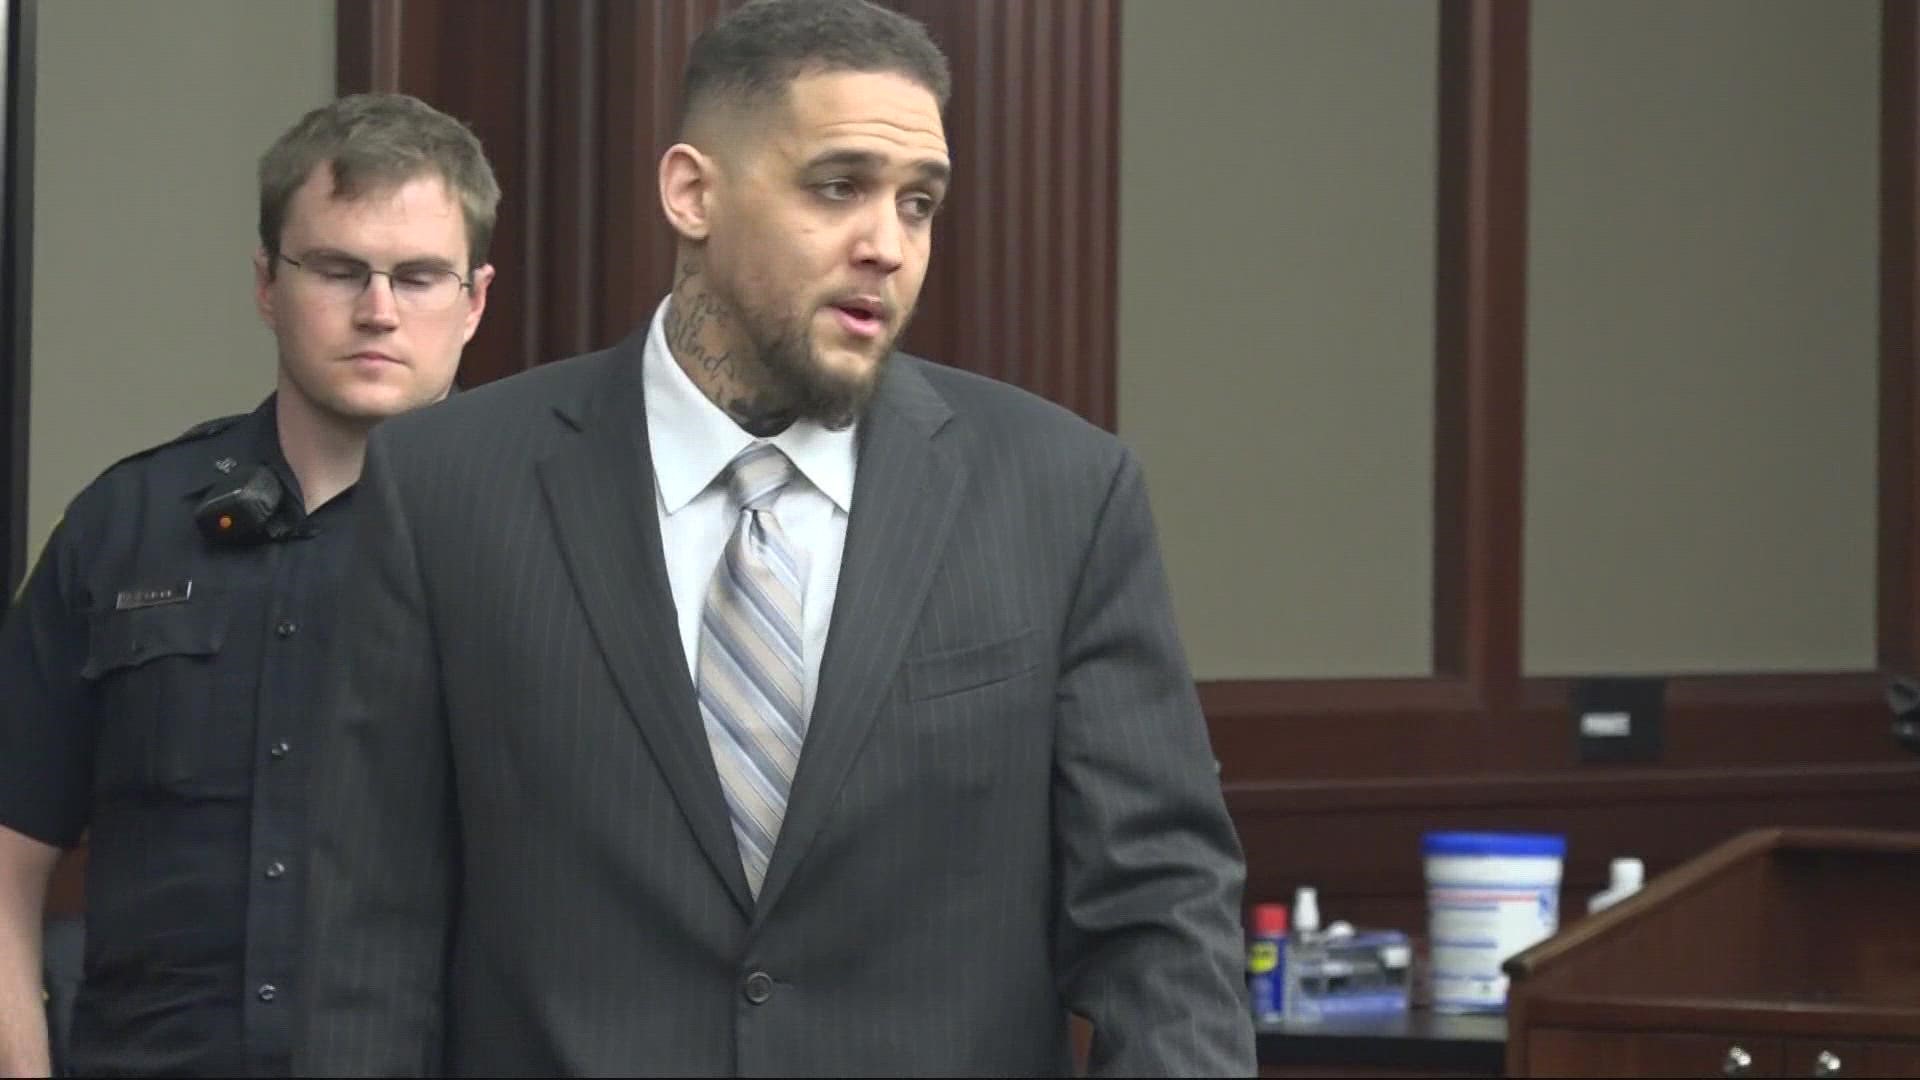 Markas Fishburne admits cutting the throat of a fellow jail inmate, but says it was self-defense.